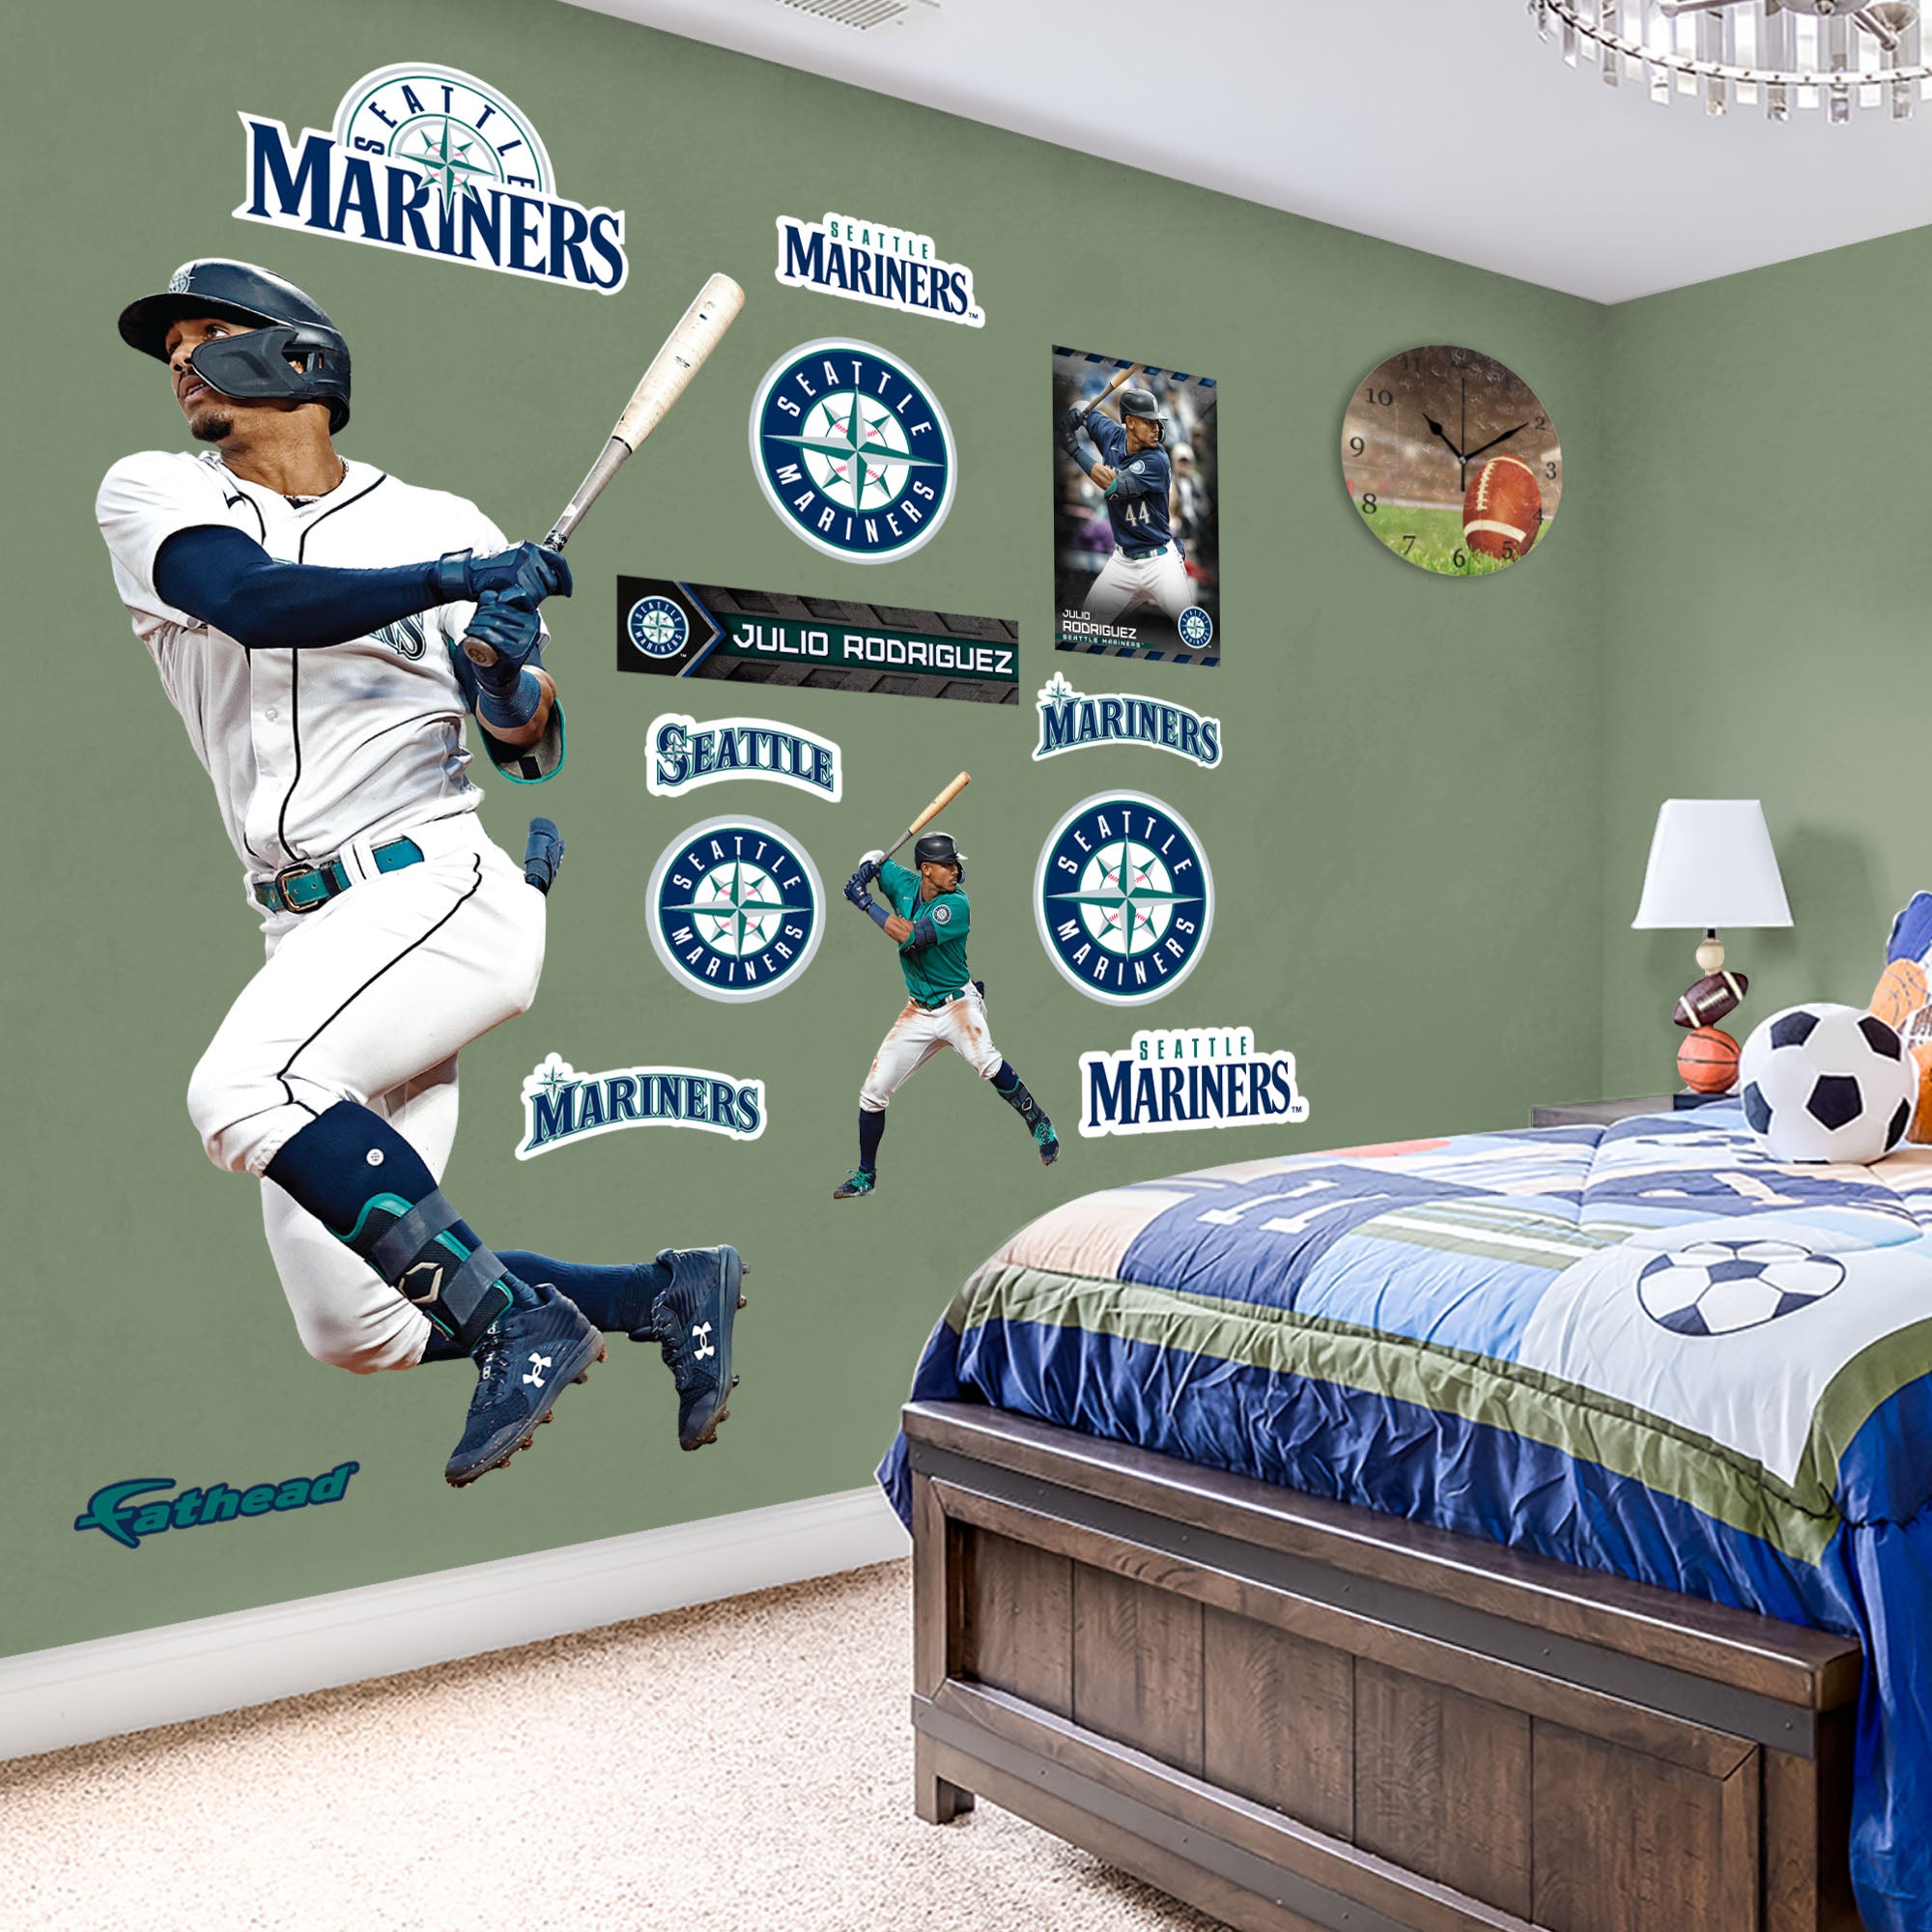 Seattle Mariners: Julio Rodríguez 2022 Poster - Officially Licensed ML –  Fathead